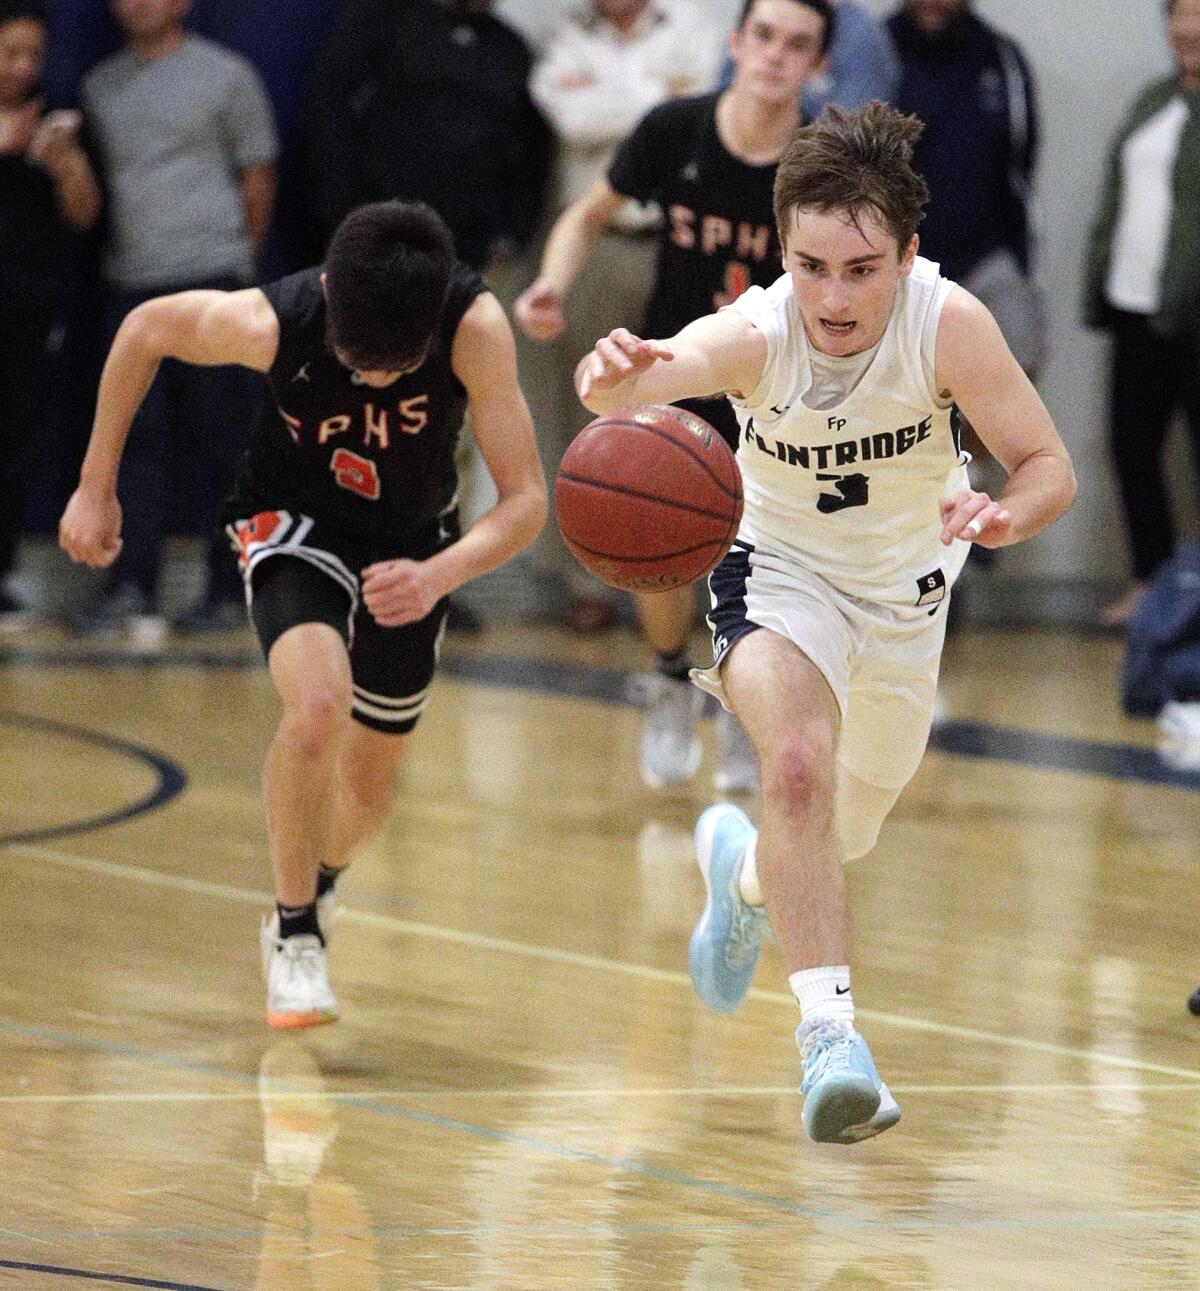 Flintridge Prep's Kevin Ashworth takes off with the ball after stealing it form South Pasadena's Preston Sharkey in a non-league boys' basketball game at Flintridge Preparatory School on Monday, January 6, 2020.